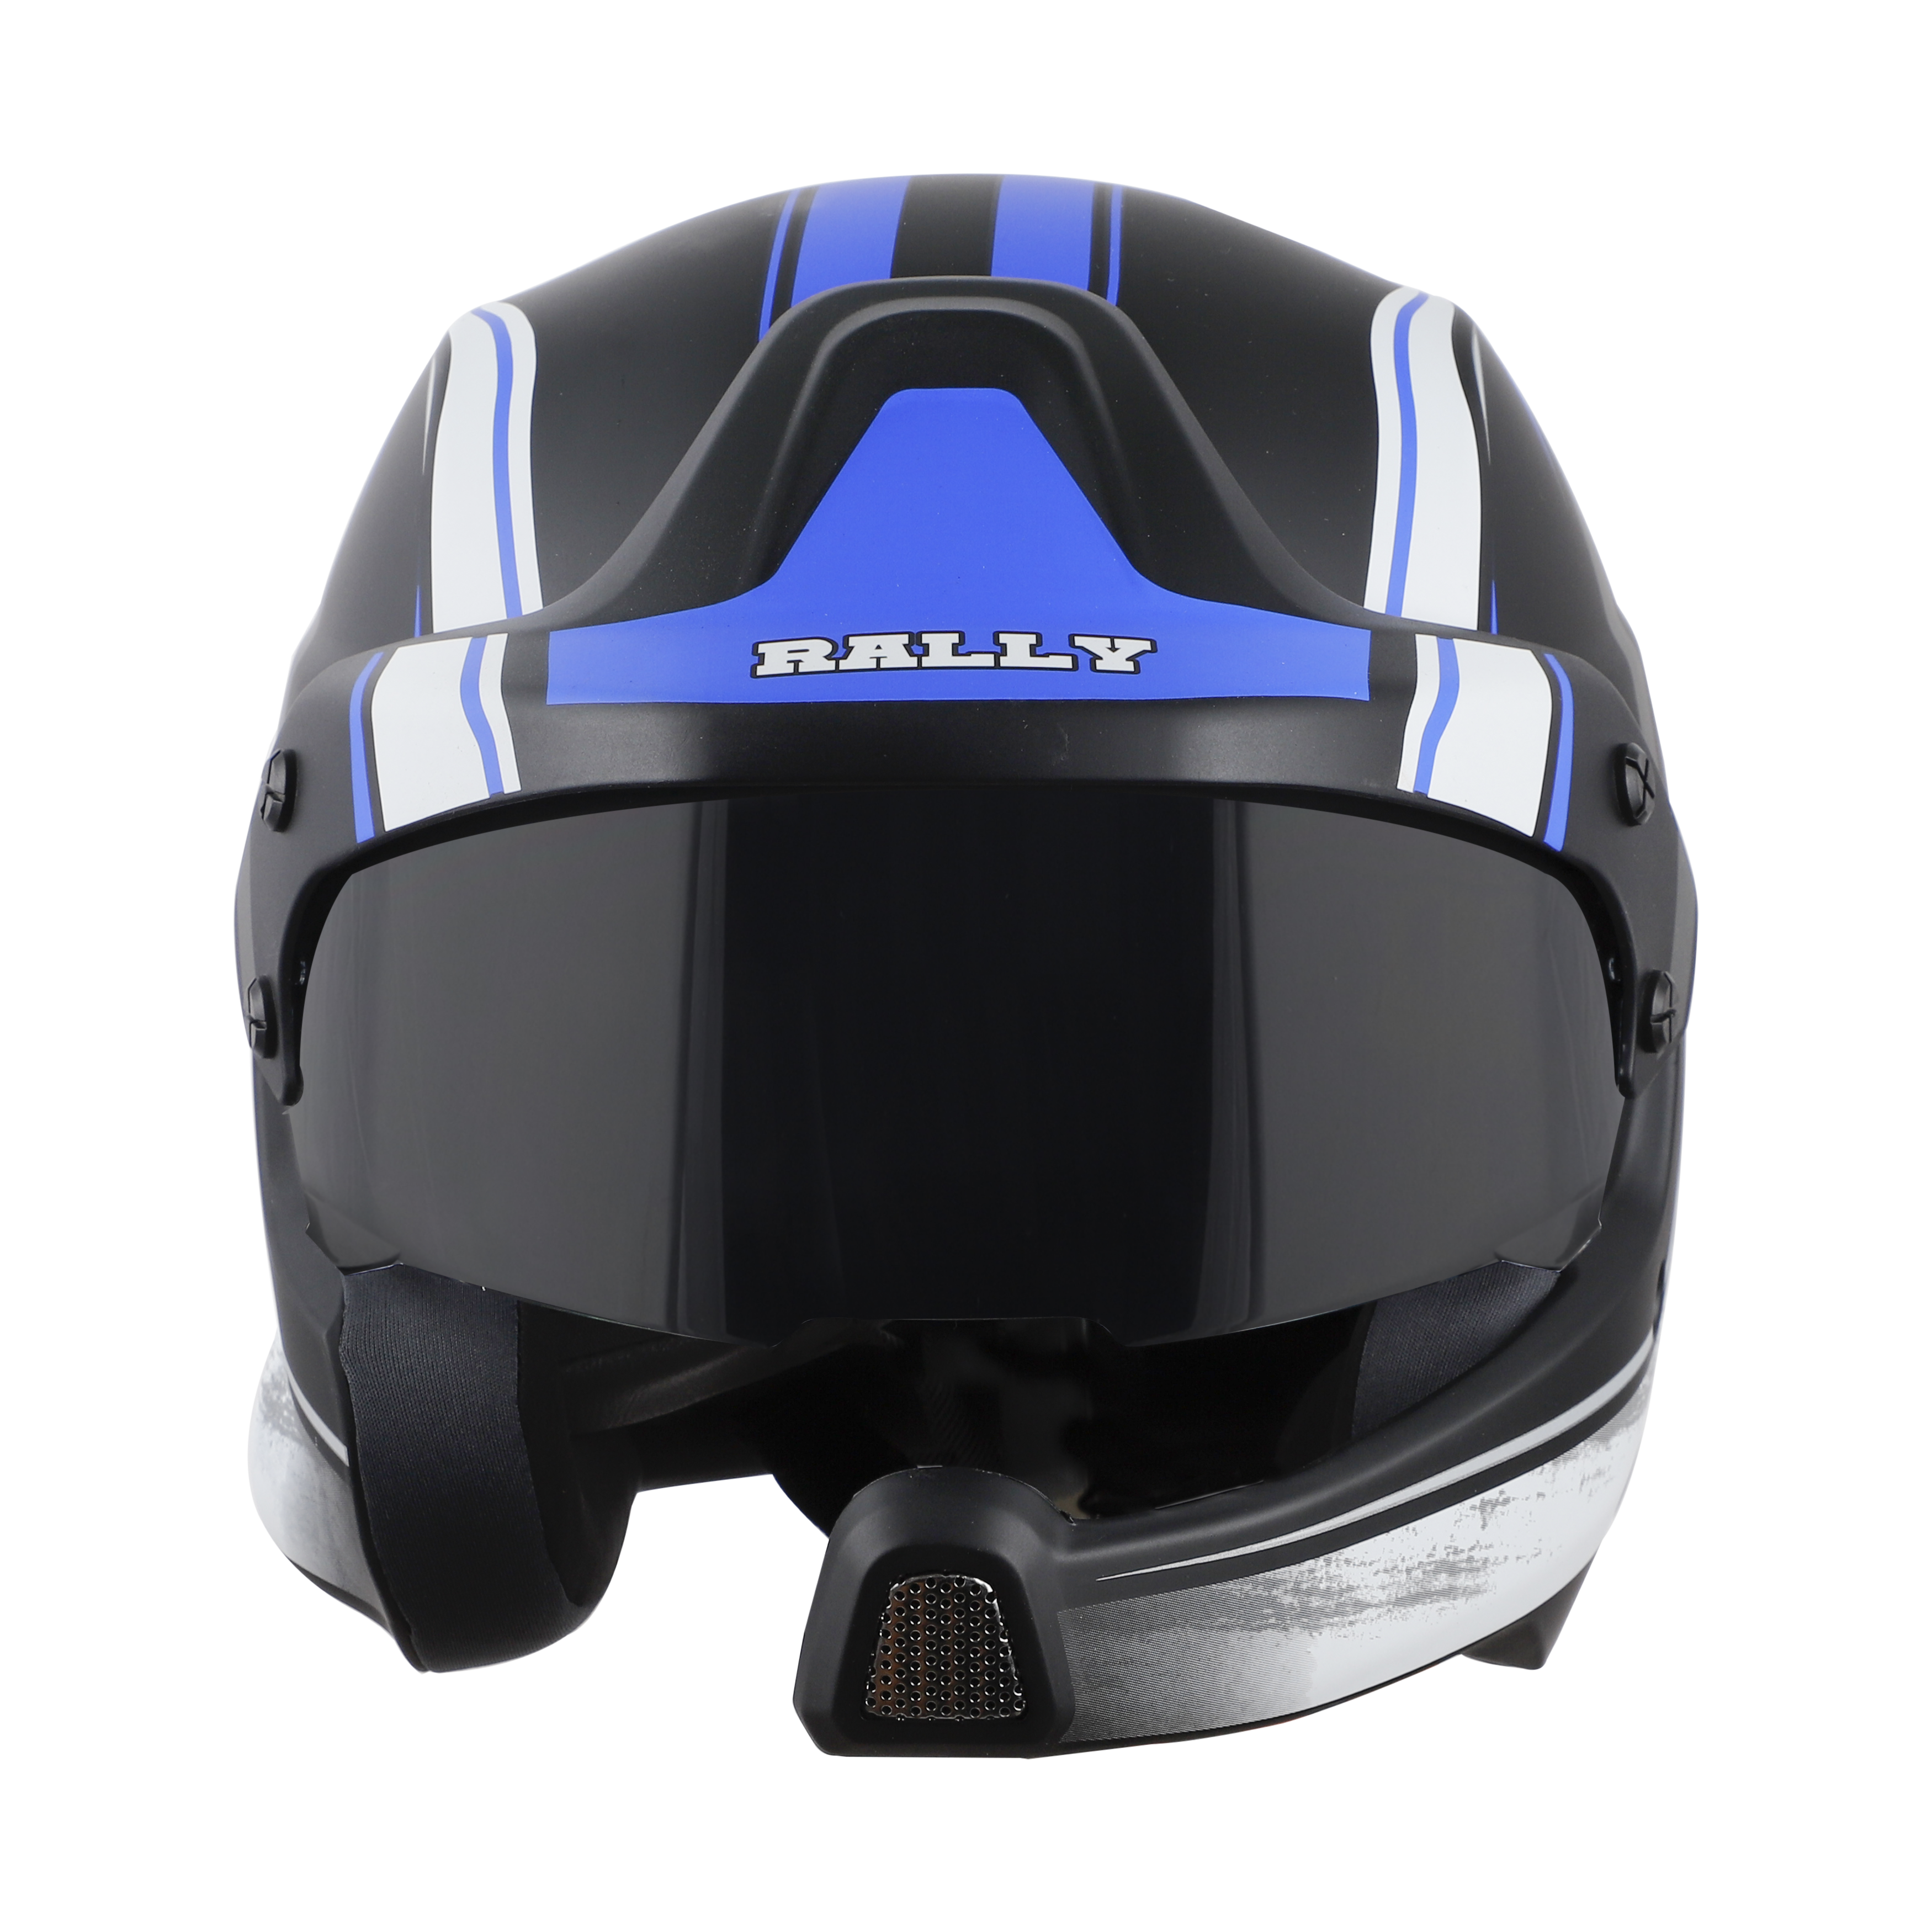 SB-51 RALLY RUT MAT BLACK WITH BLUE ( FITTED WITH CLEAR VISOR EXTRA SMOKE VISOR FREE)